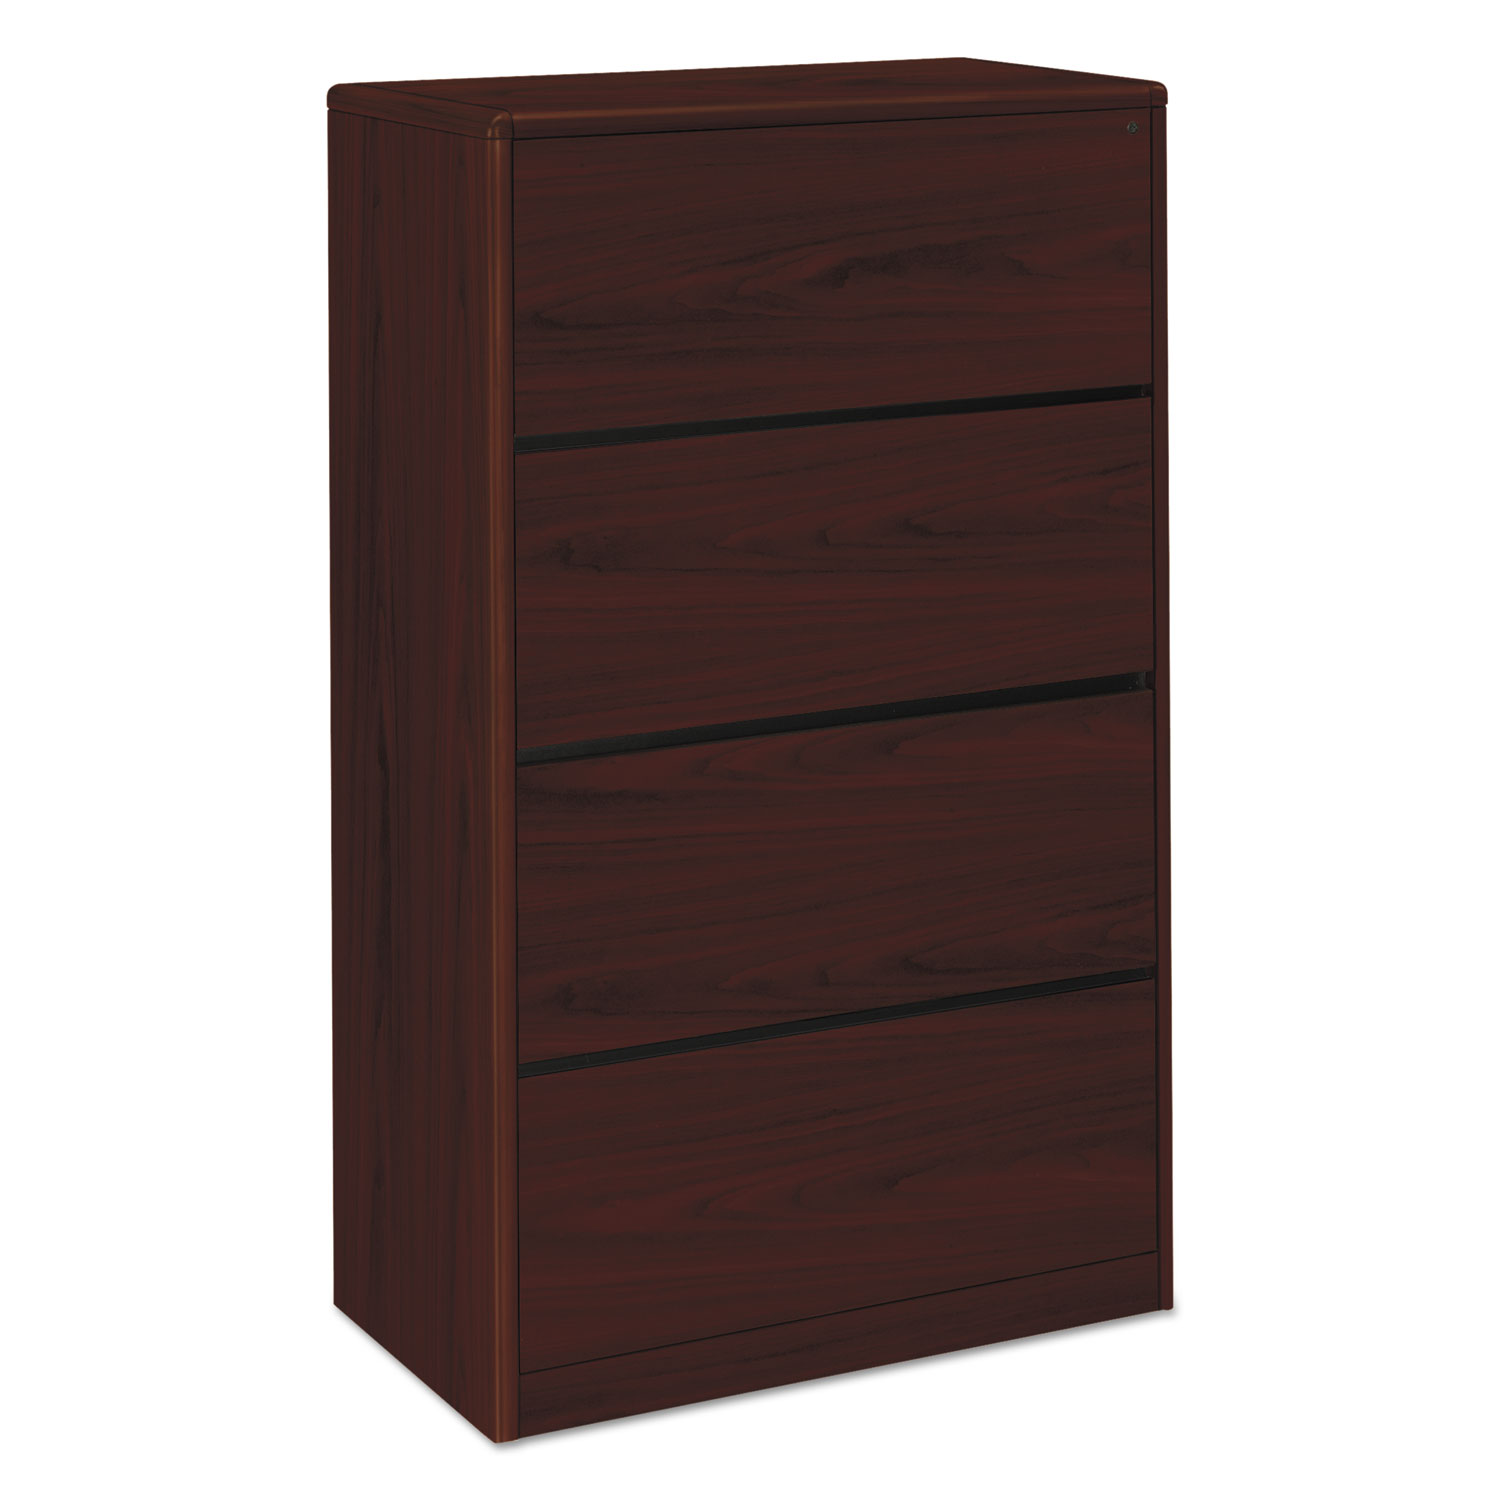 10700 Series Four Drawer Lateral File, 36w x 20d x 59 1/8h, Mahogany